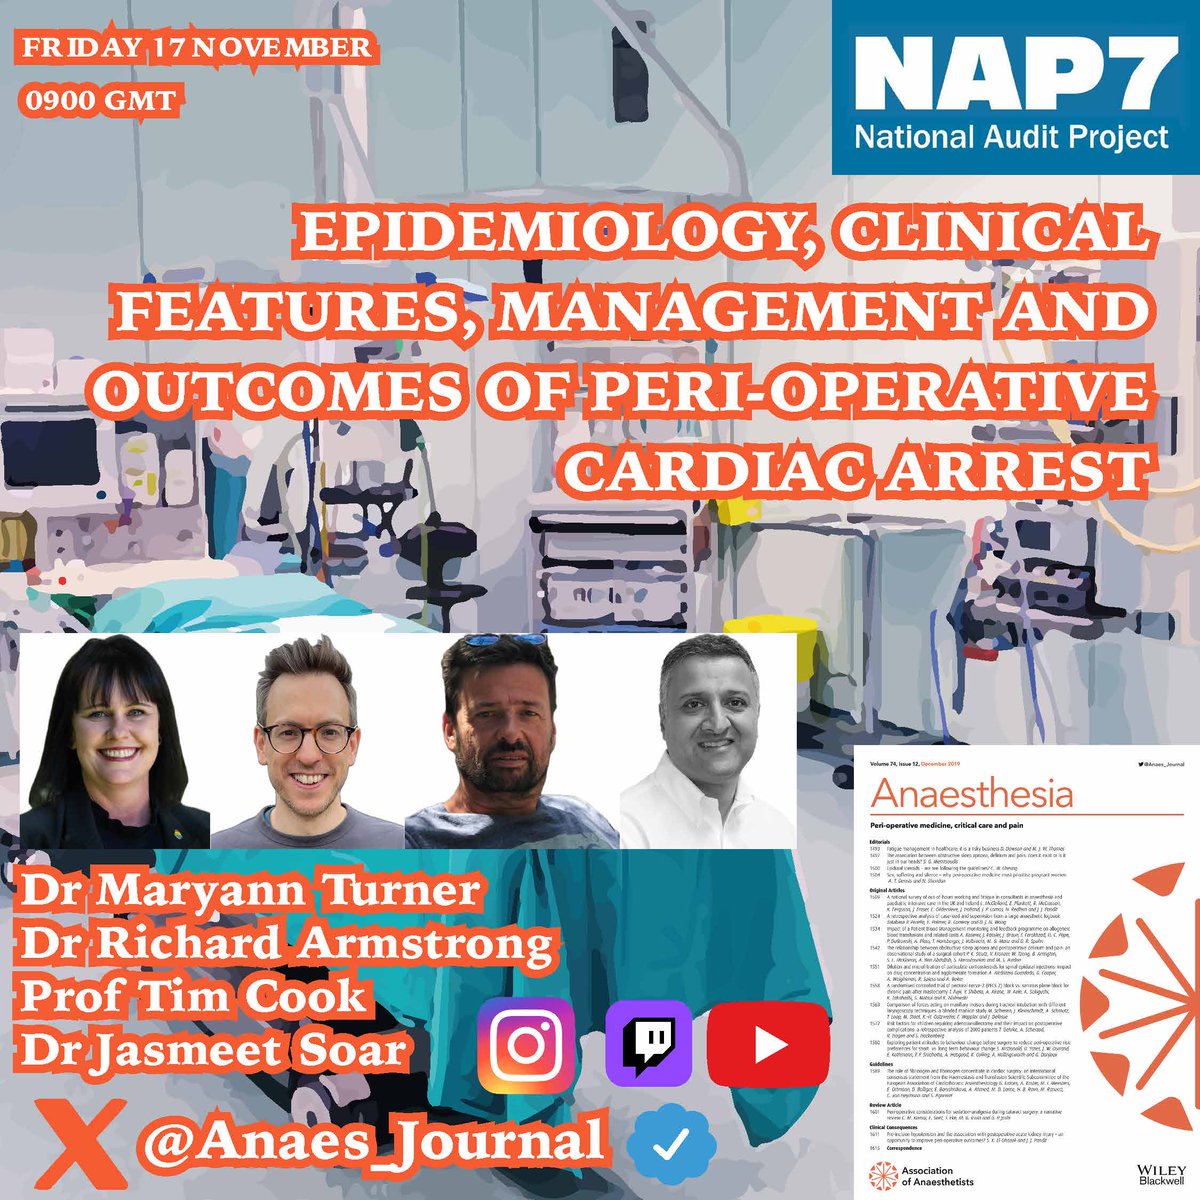 The first two @RCoANews @NAPs_RCoA #NAP7 interviews have been seen by >35k viewers! Join us Friday 0900 GMT for the third instalment and launch of the main results papers with @drrichstrong, @MaryannCTurner, @jas_soar and @doctimcook! youtube.com/watch?v=t8a_VZ…